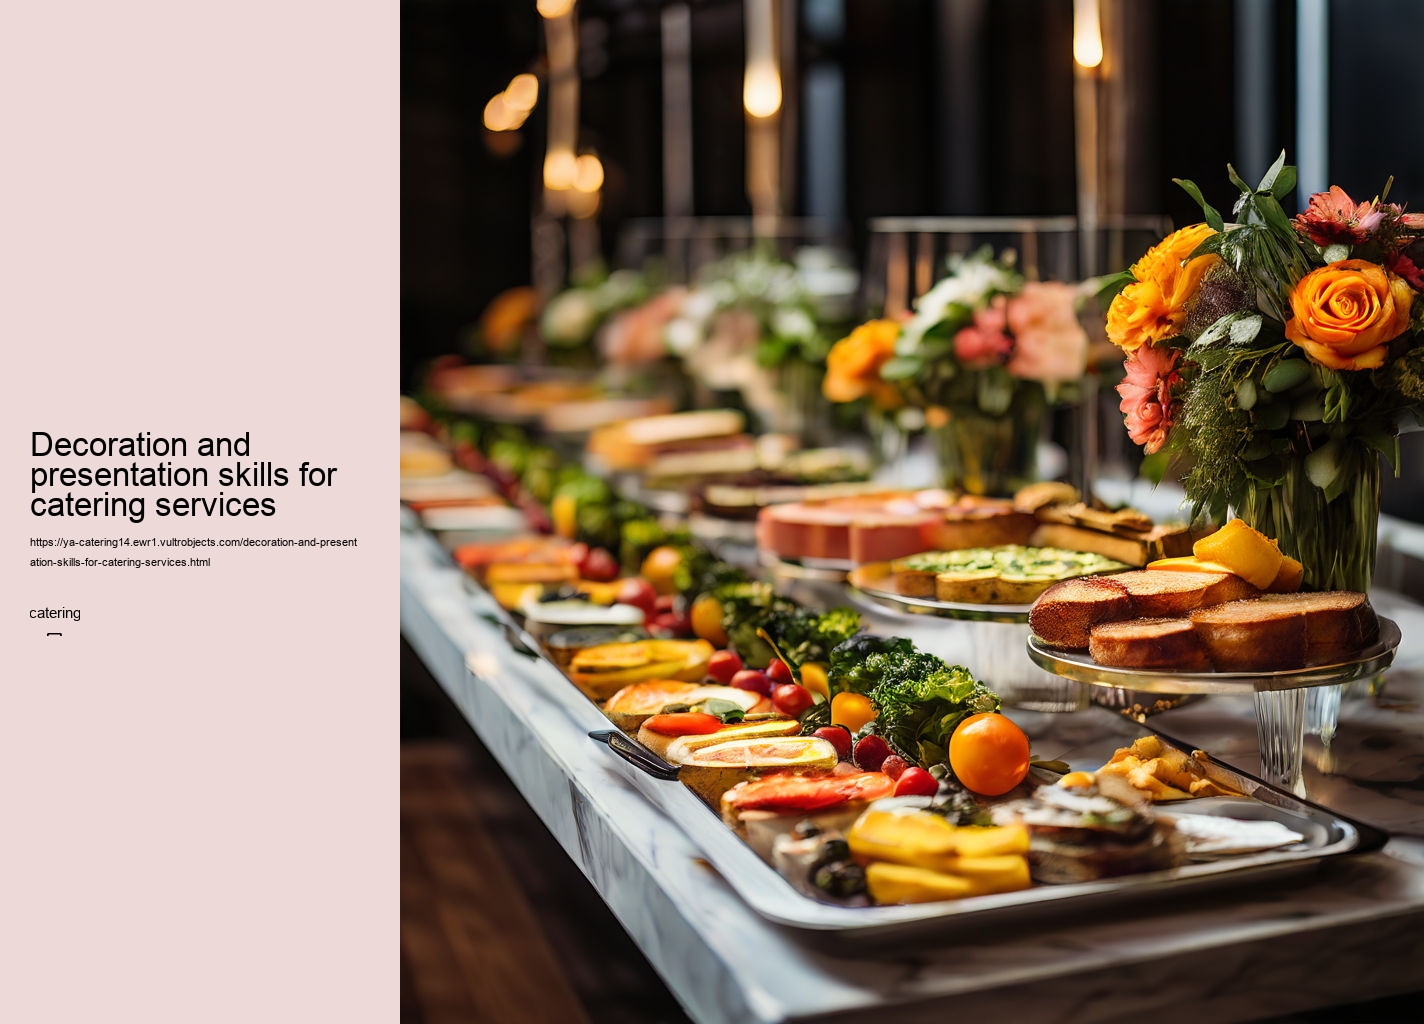 Decoration and presentation skills for catering services